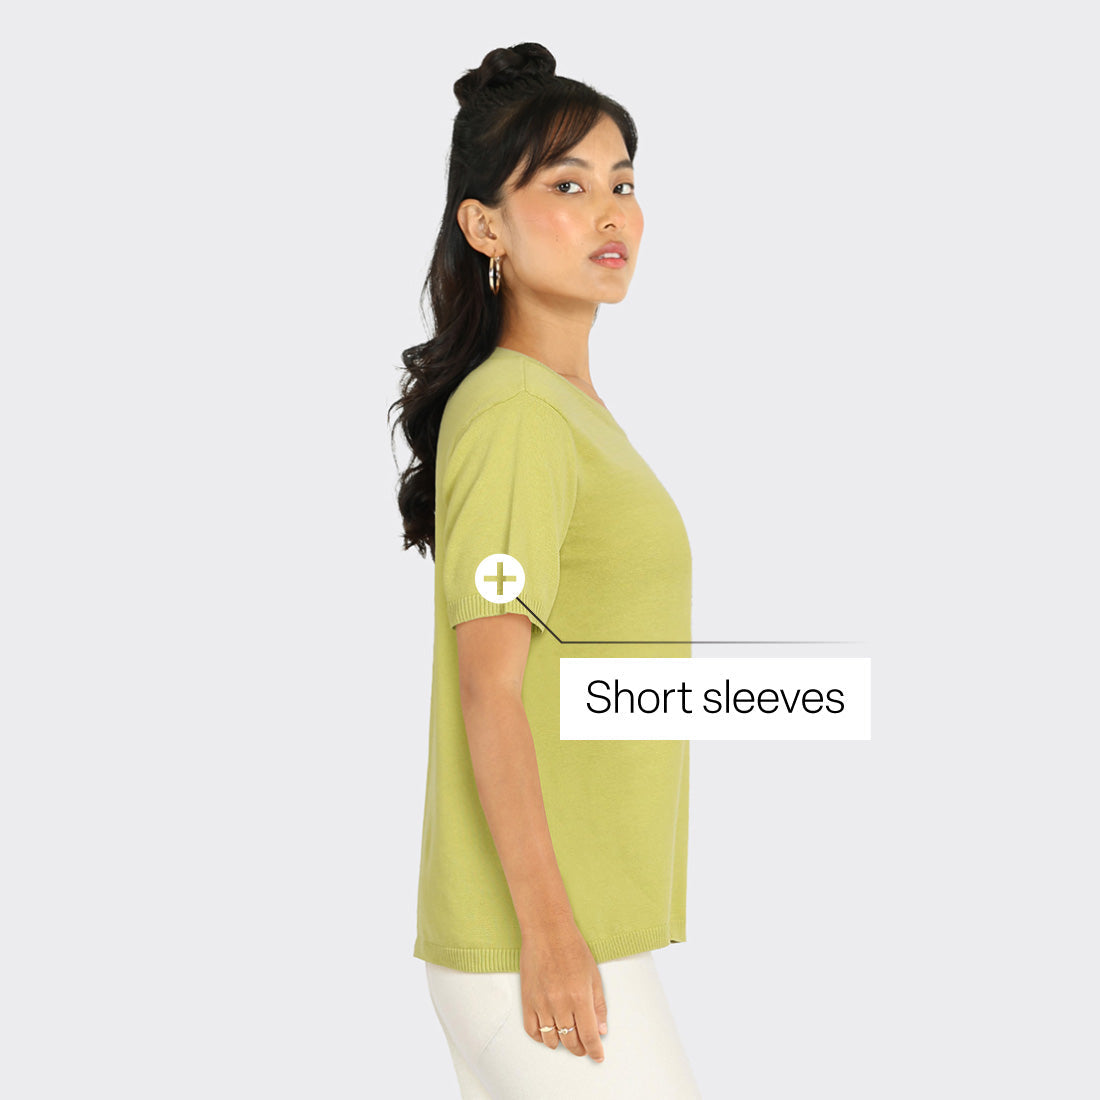 The At-Ease Cotton Knit Top